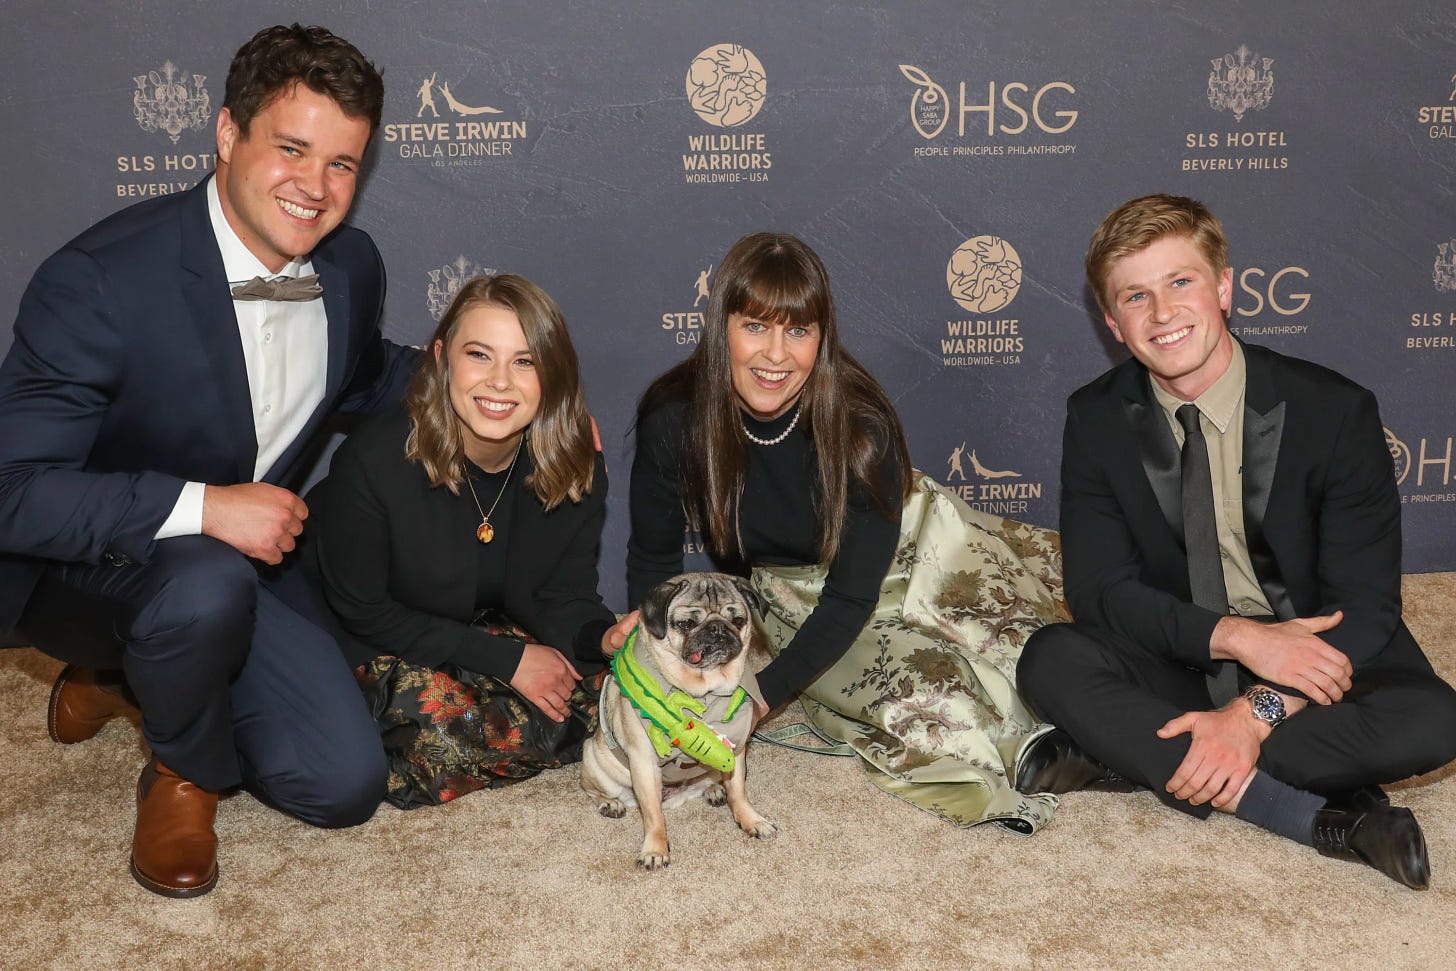 The Irwin family and their dog on the red carpet at the Steve Irwin Gala Dinner.